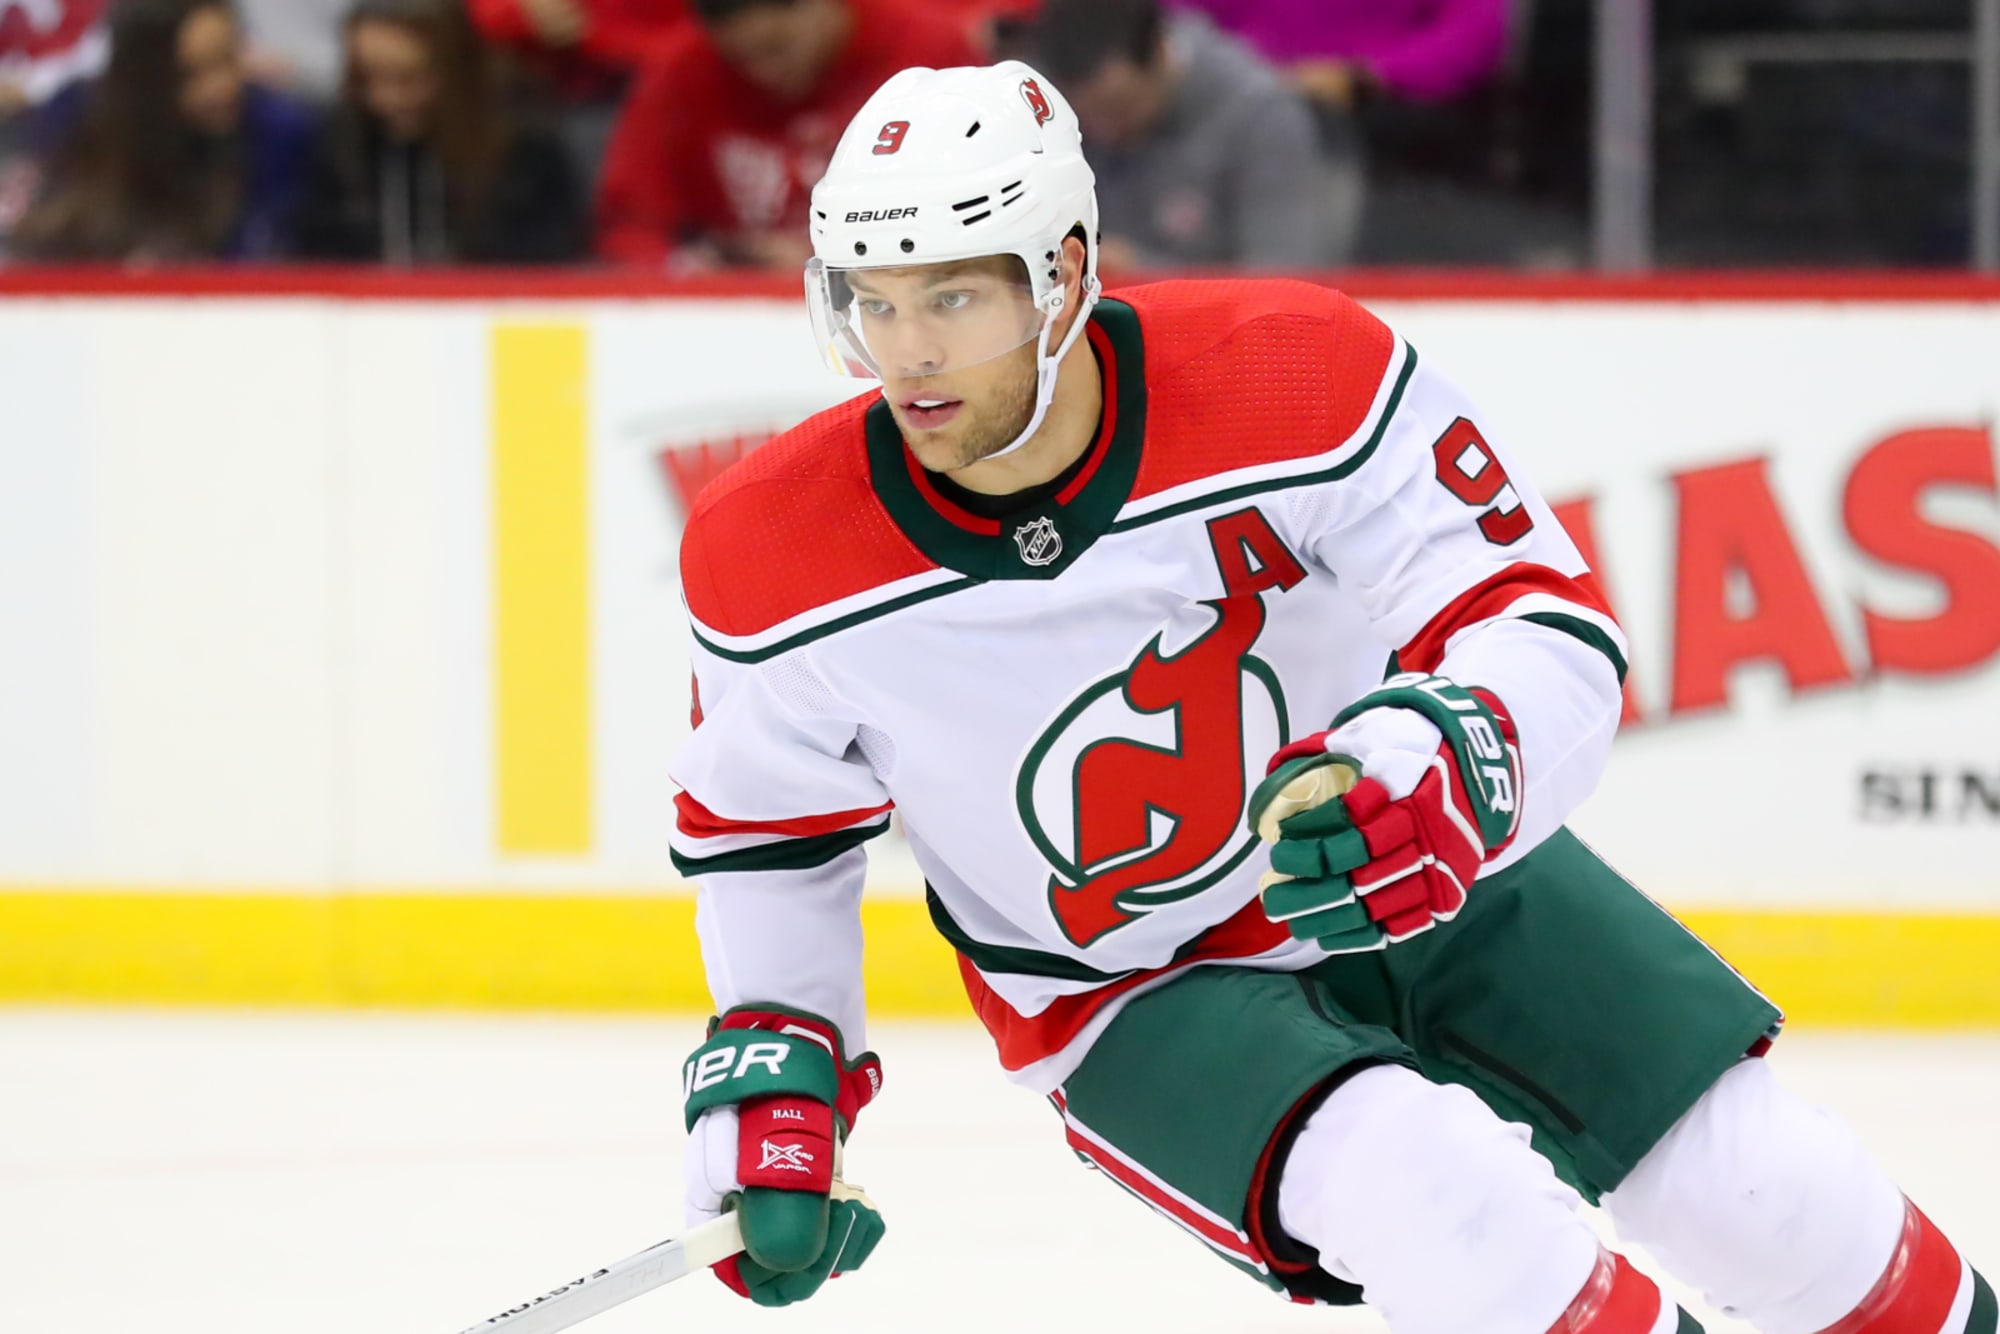 New Jersey Devils Trade Captain Andy Greene to the New York